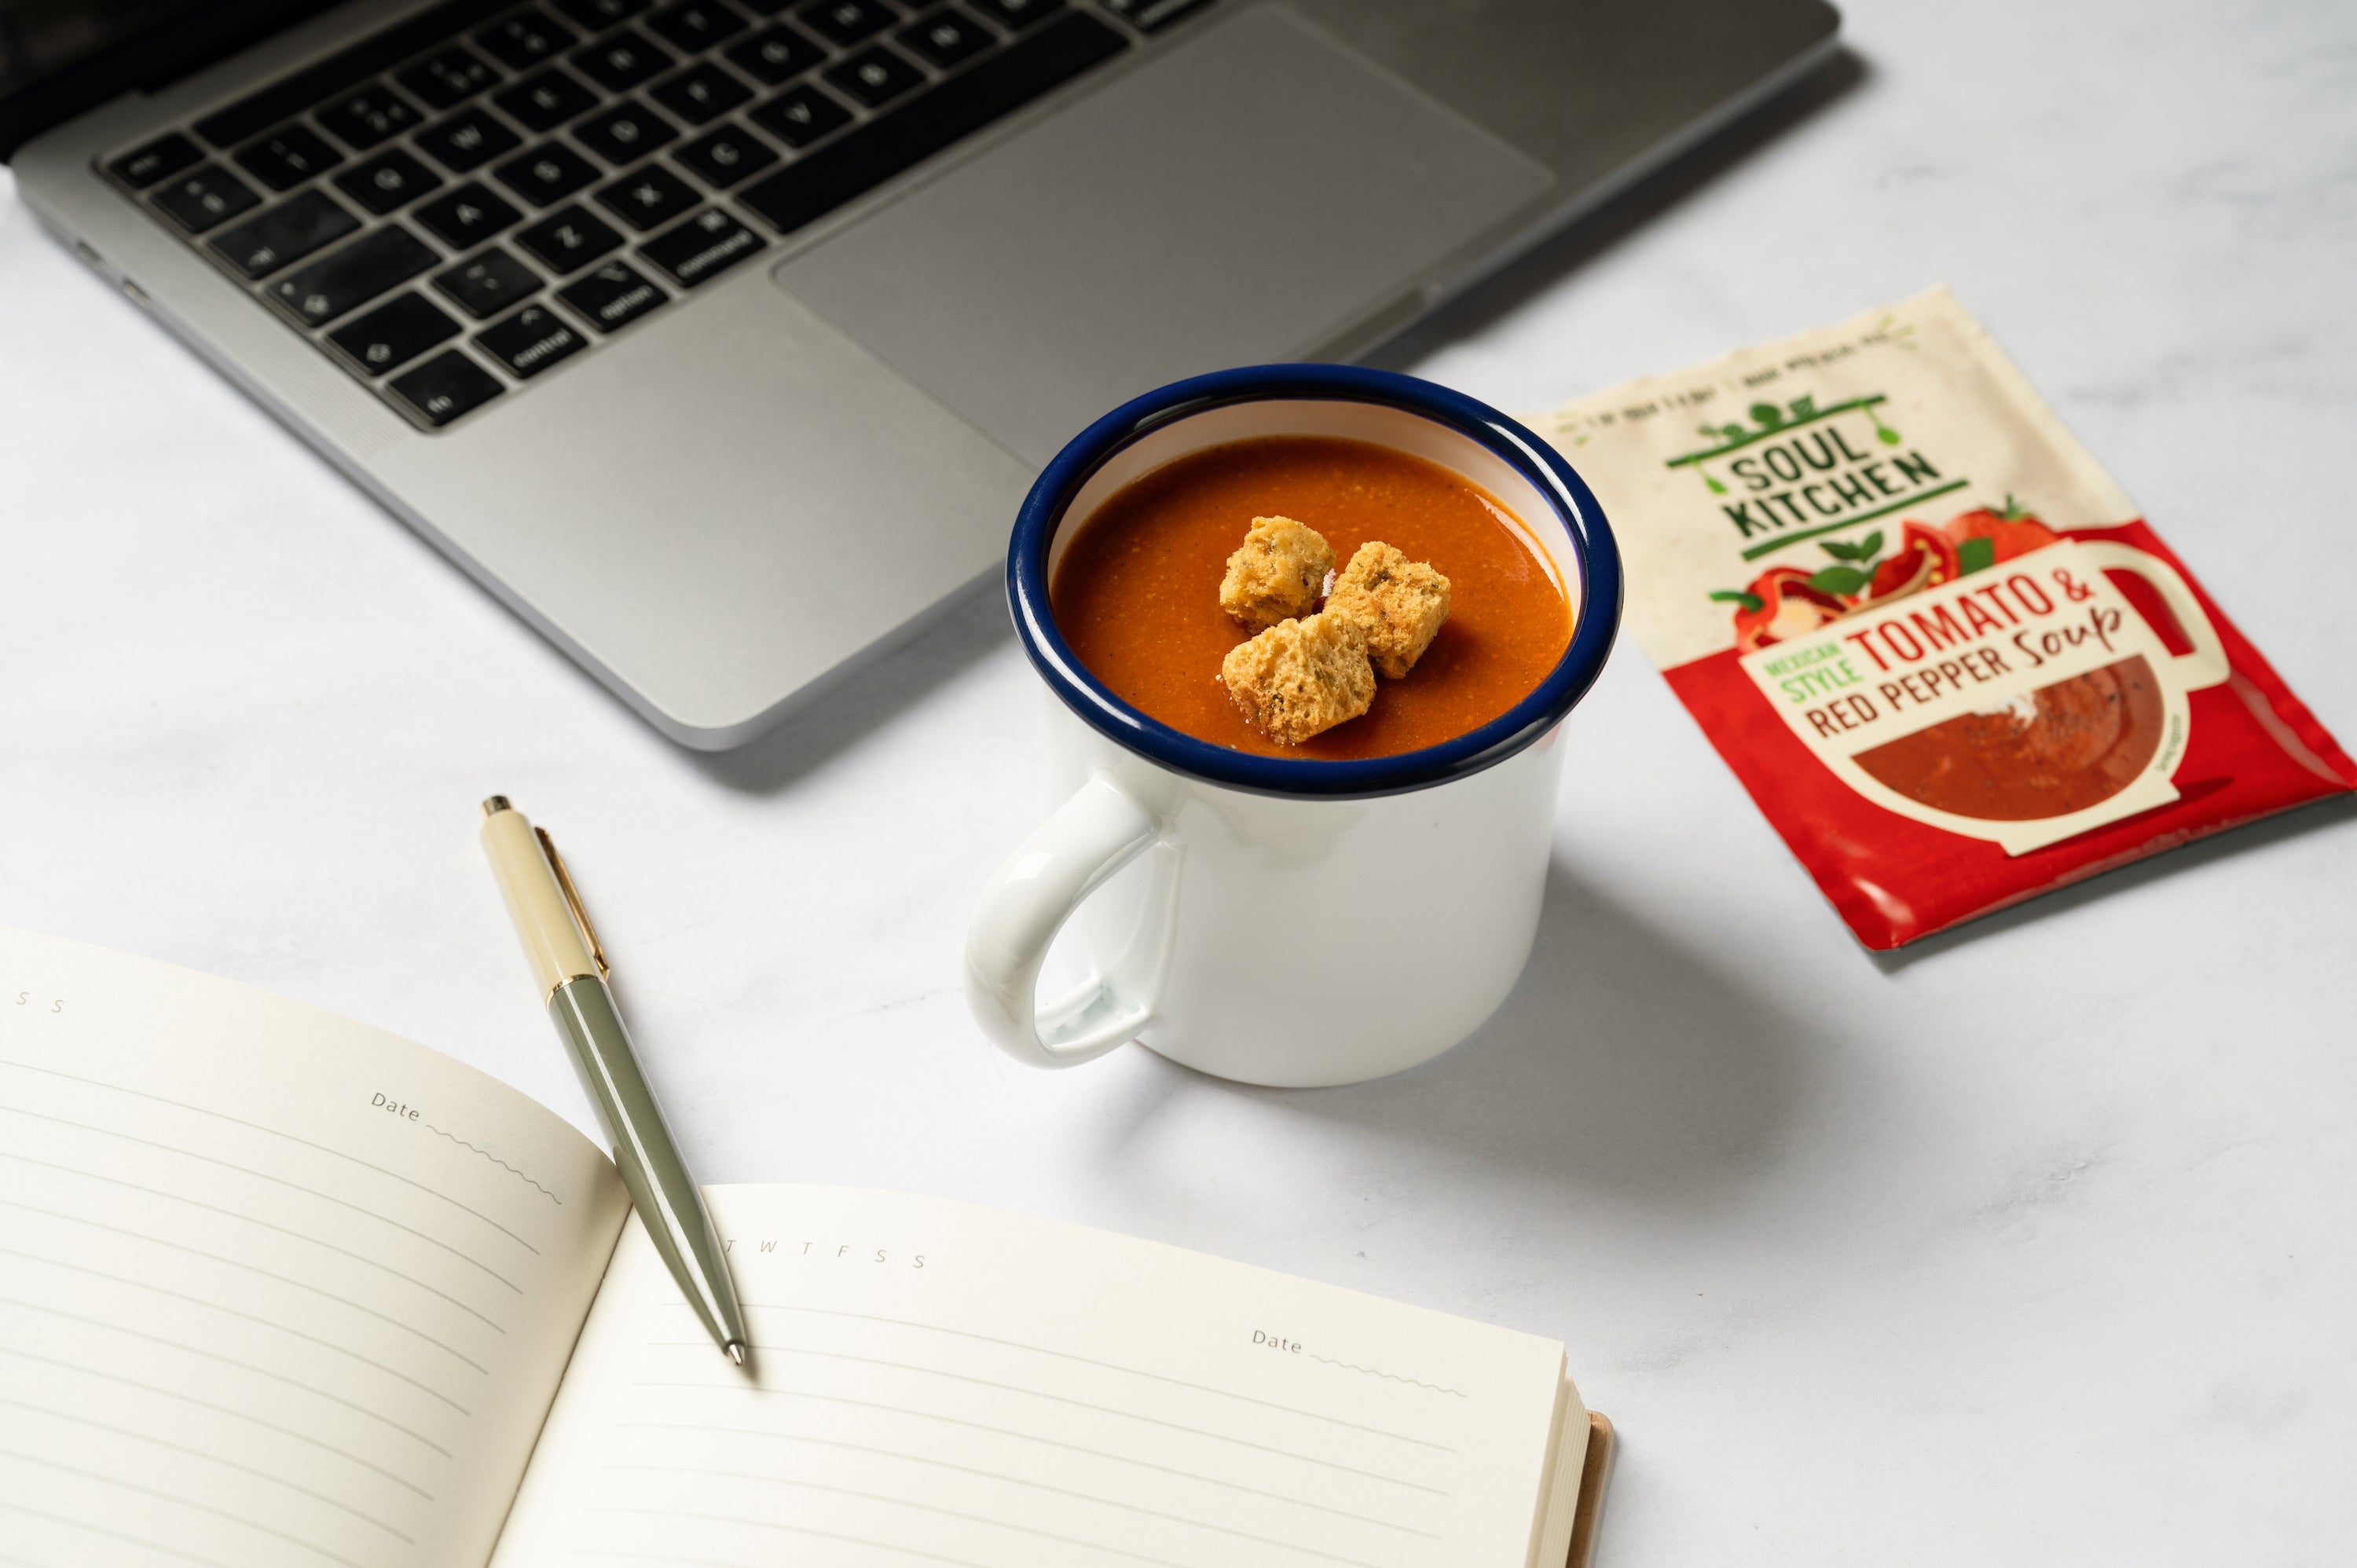 Image of a desk with a notebook and pen. On the desk is also a cup of soup next to the packet of Tomato and Red Pepper Soup